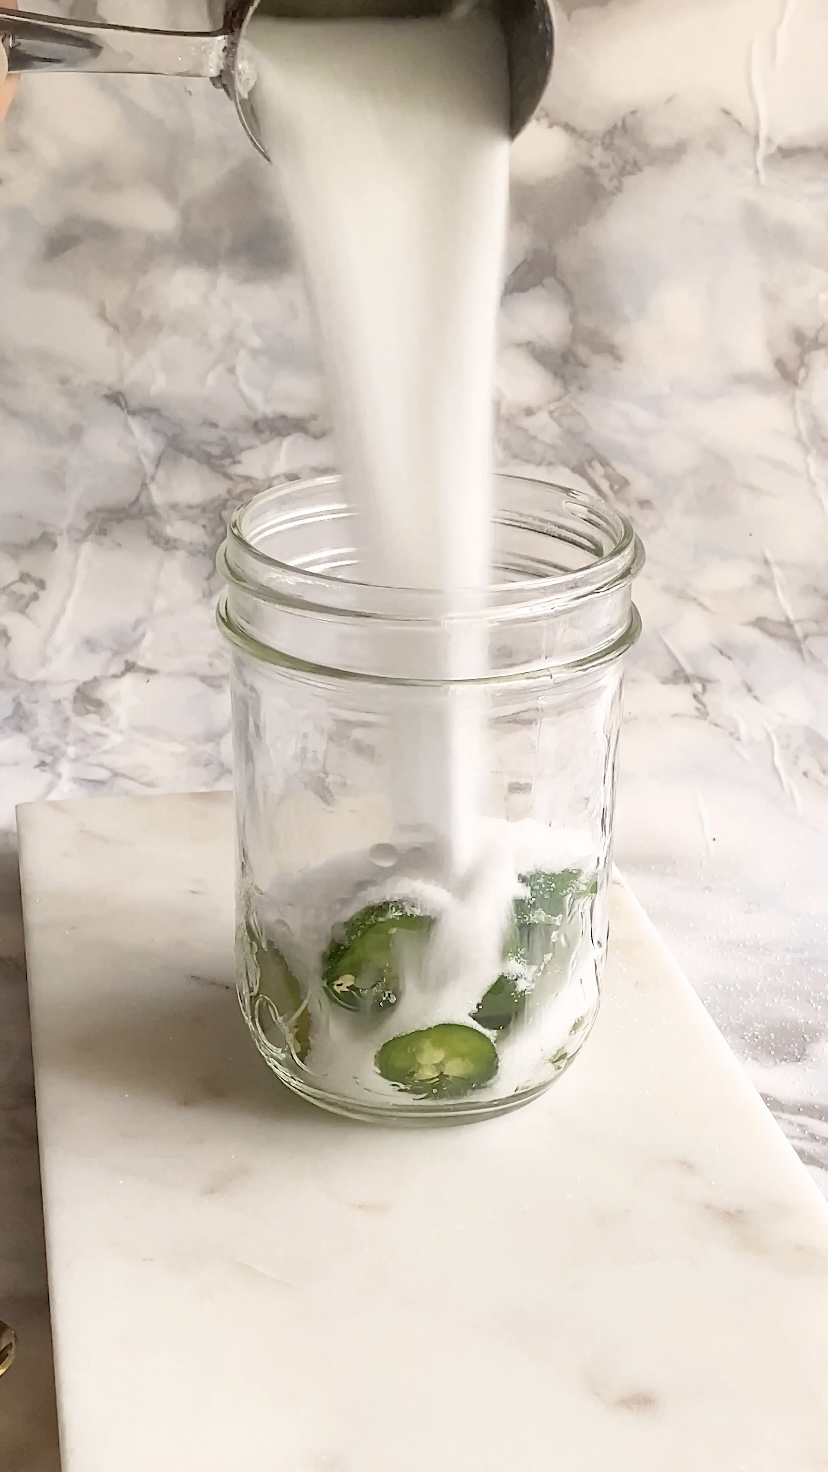 Sugar is poured into a jar with jalapeno slices in it.